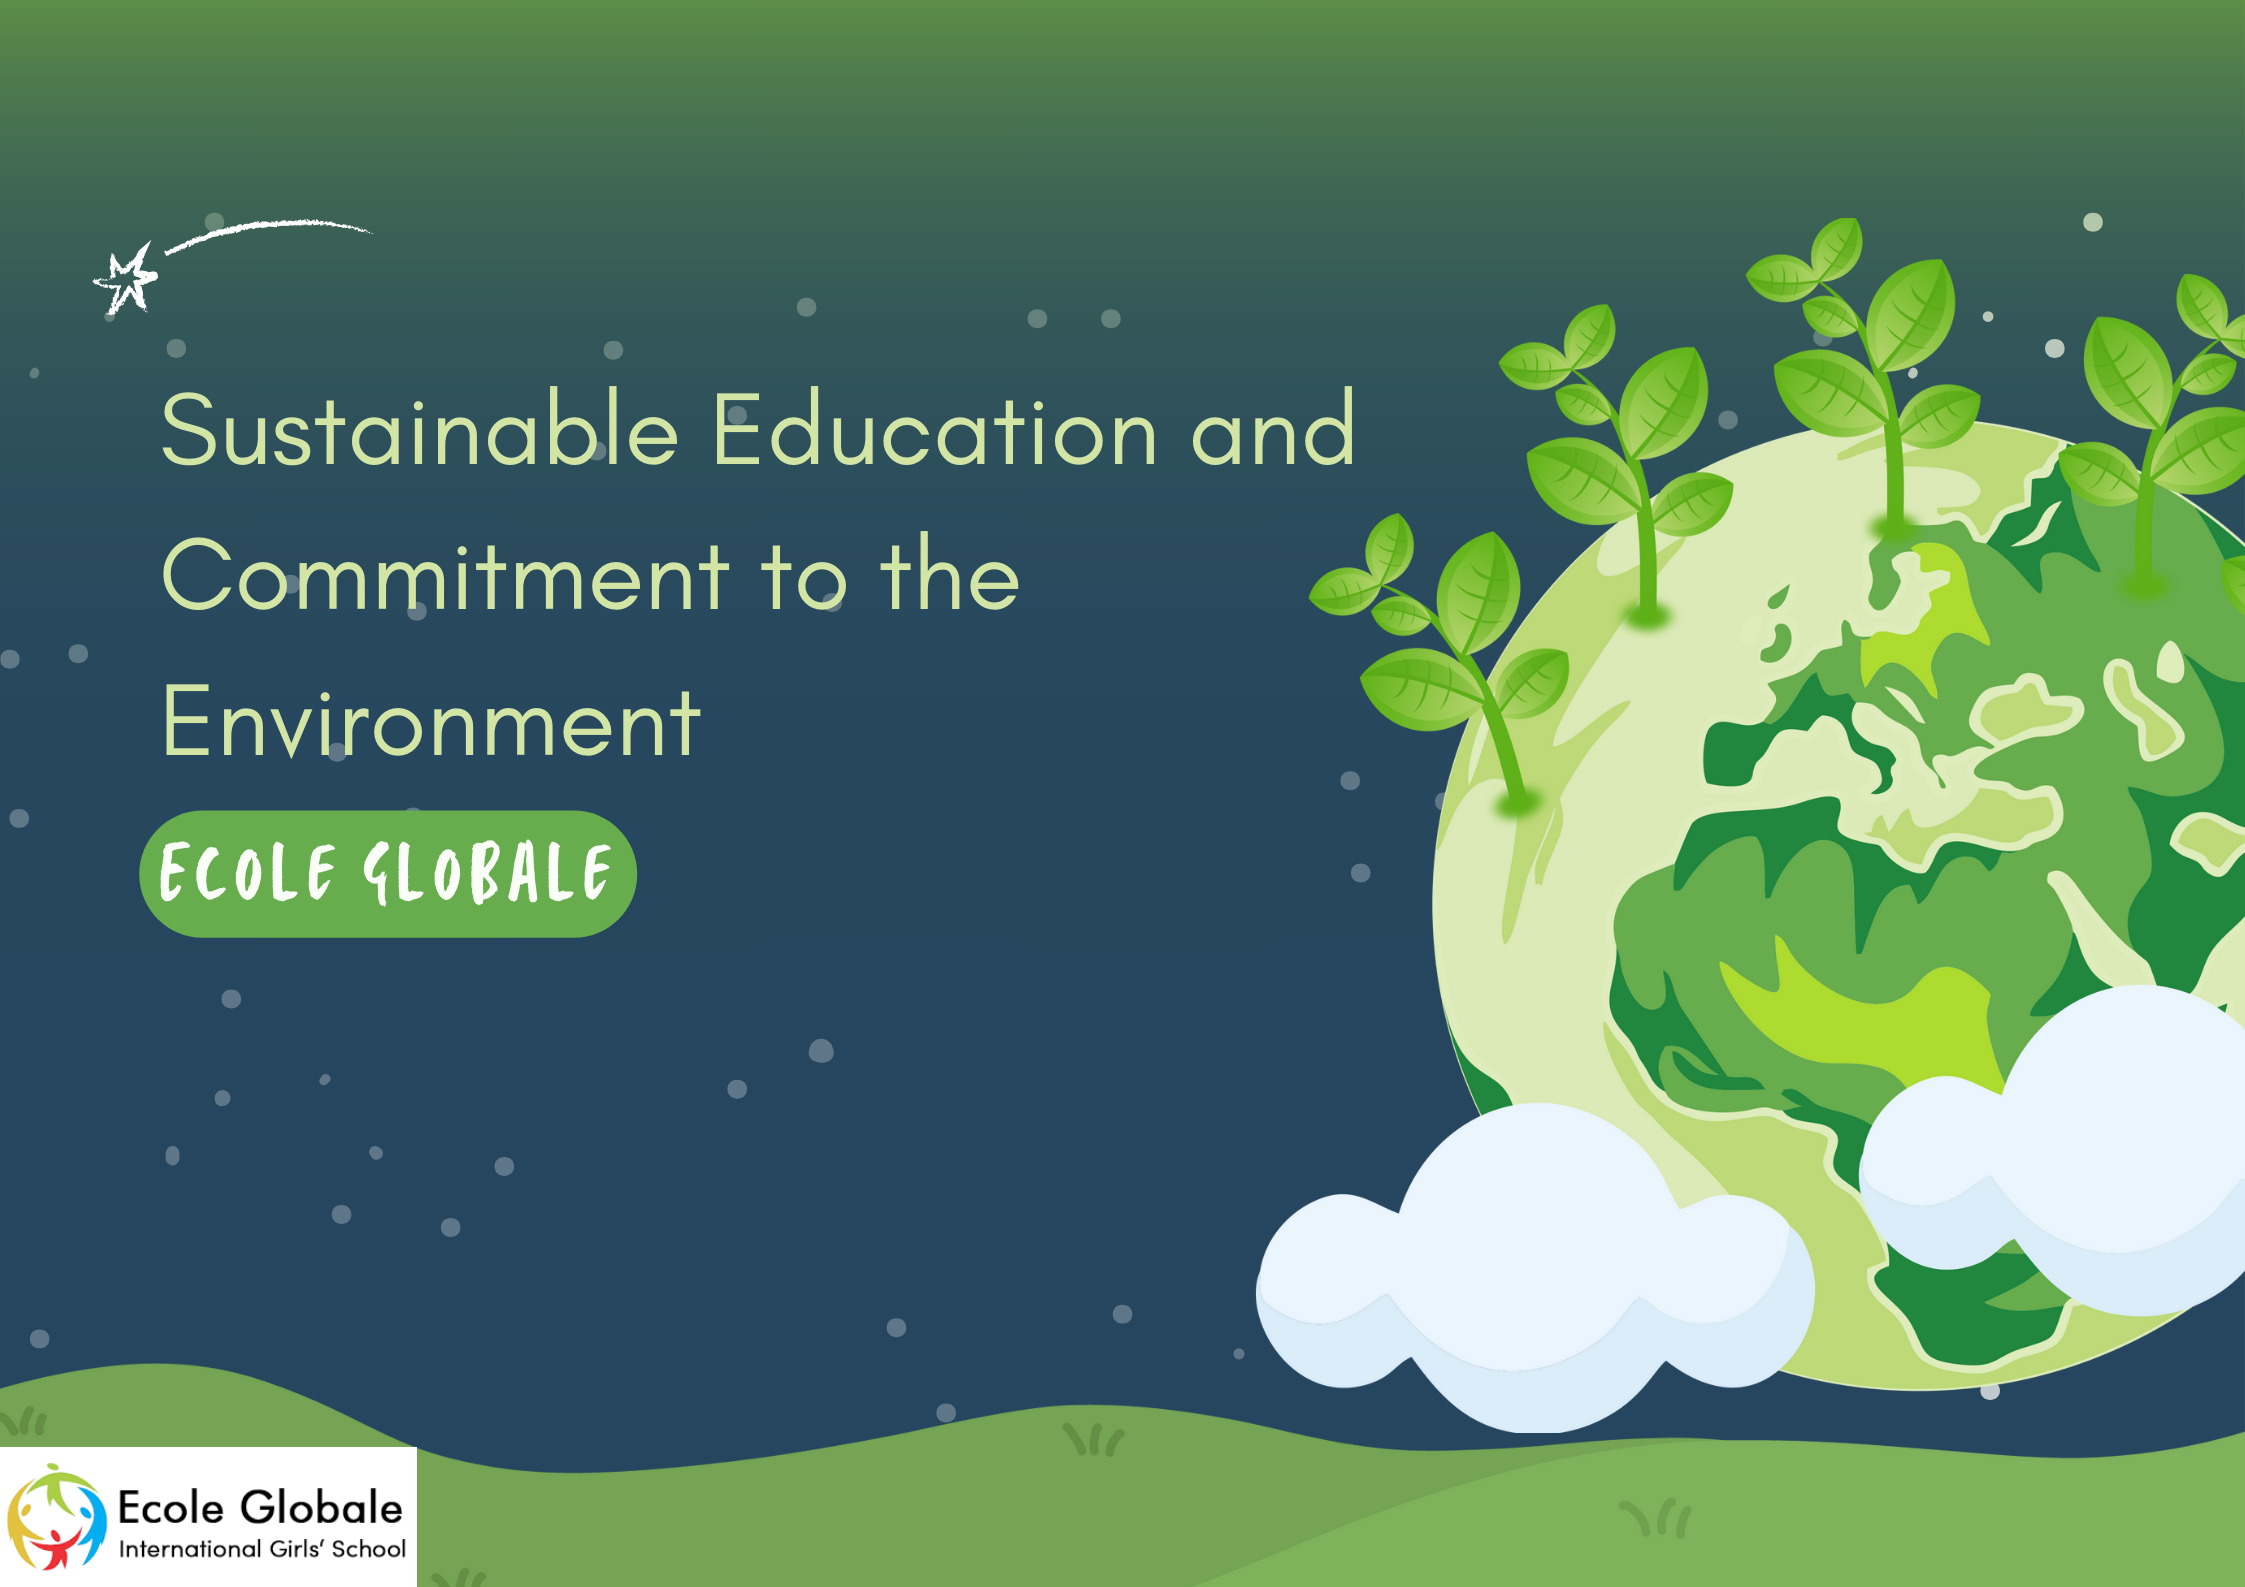 You are currently viewing Sustainable Education and Commitment to the Environment at Ecole Globale